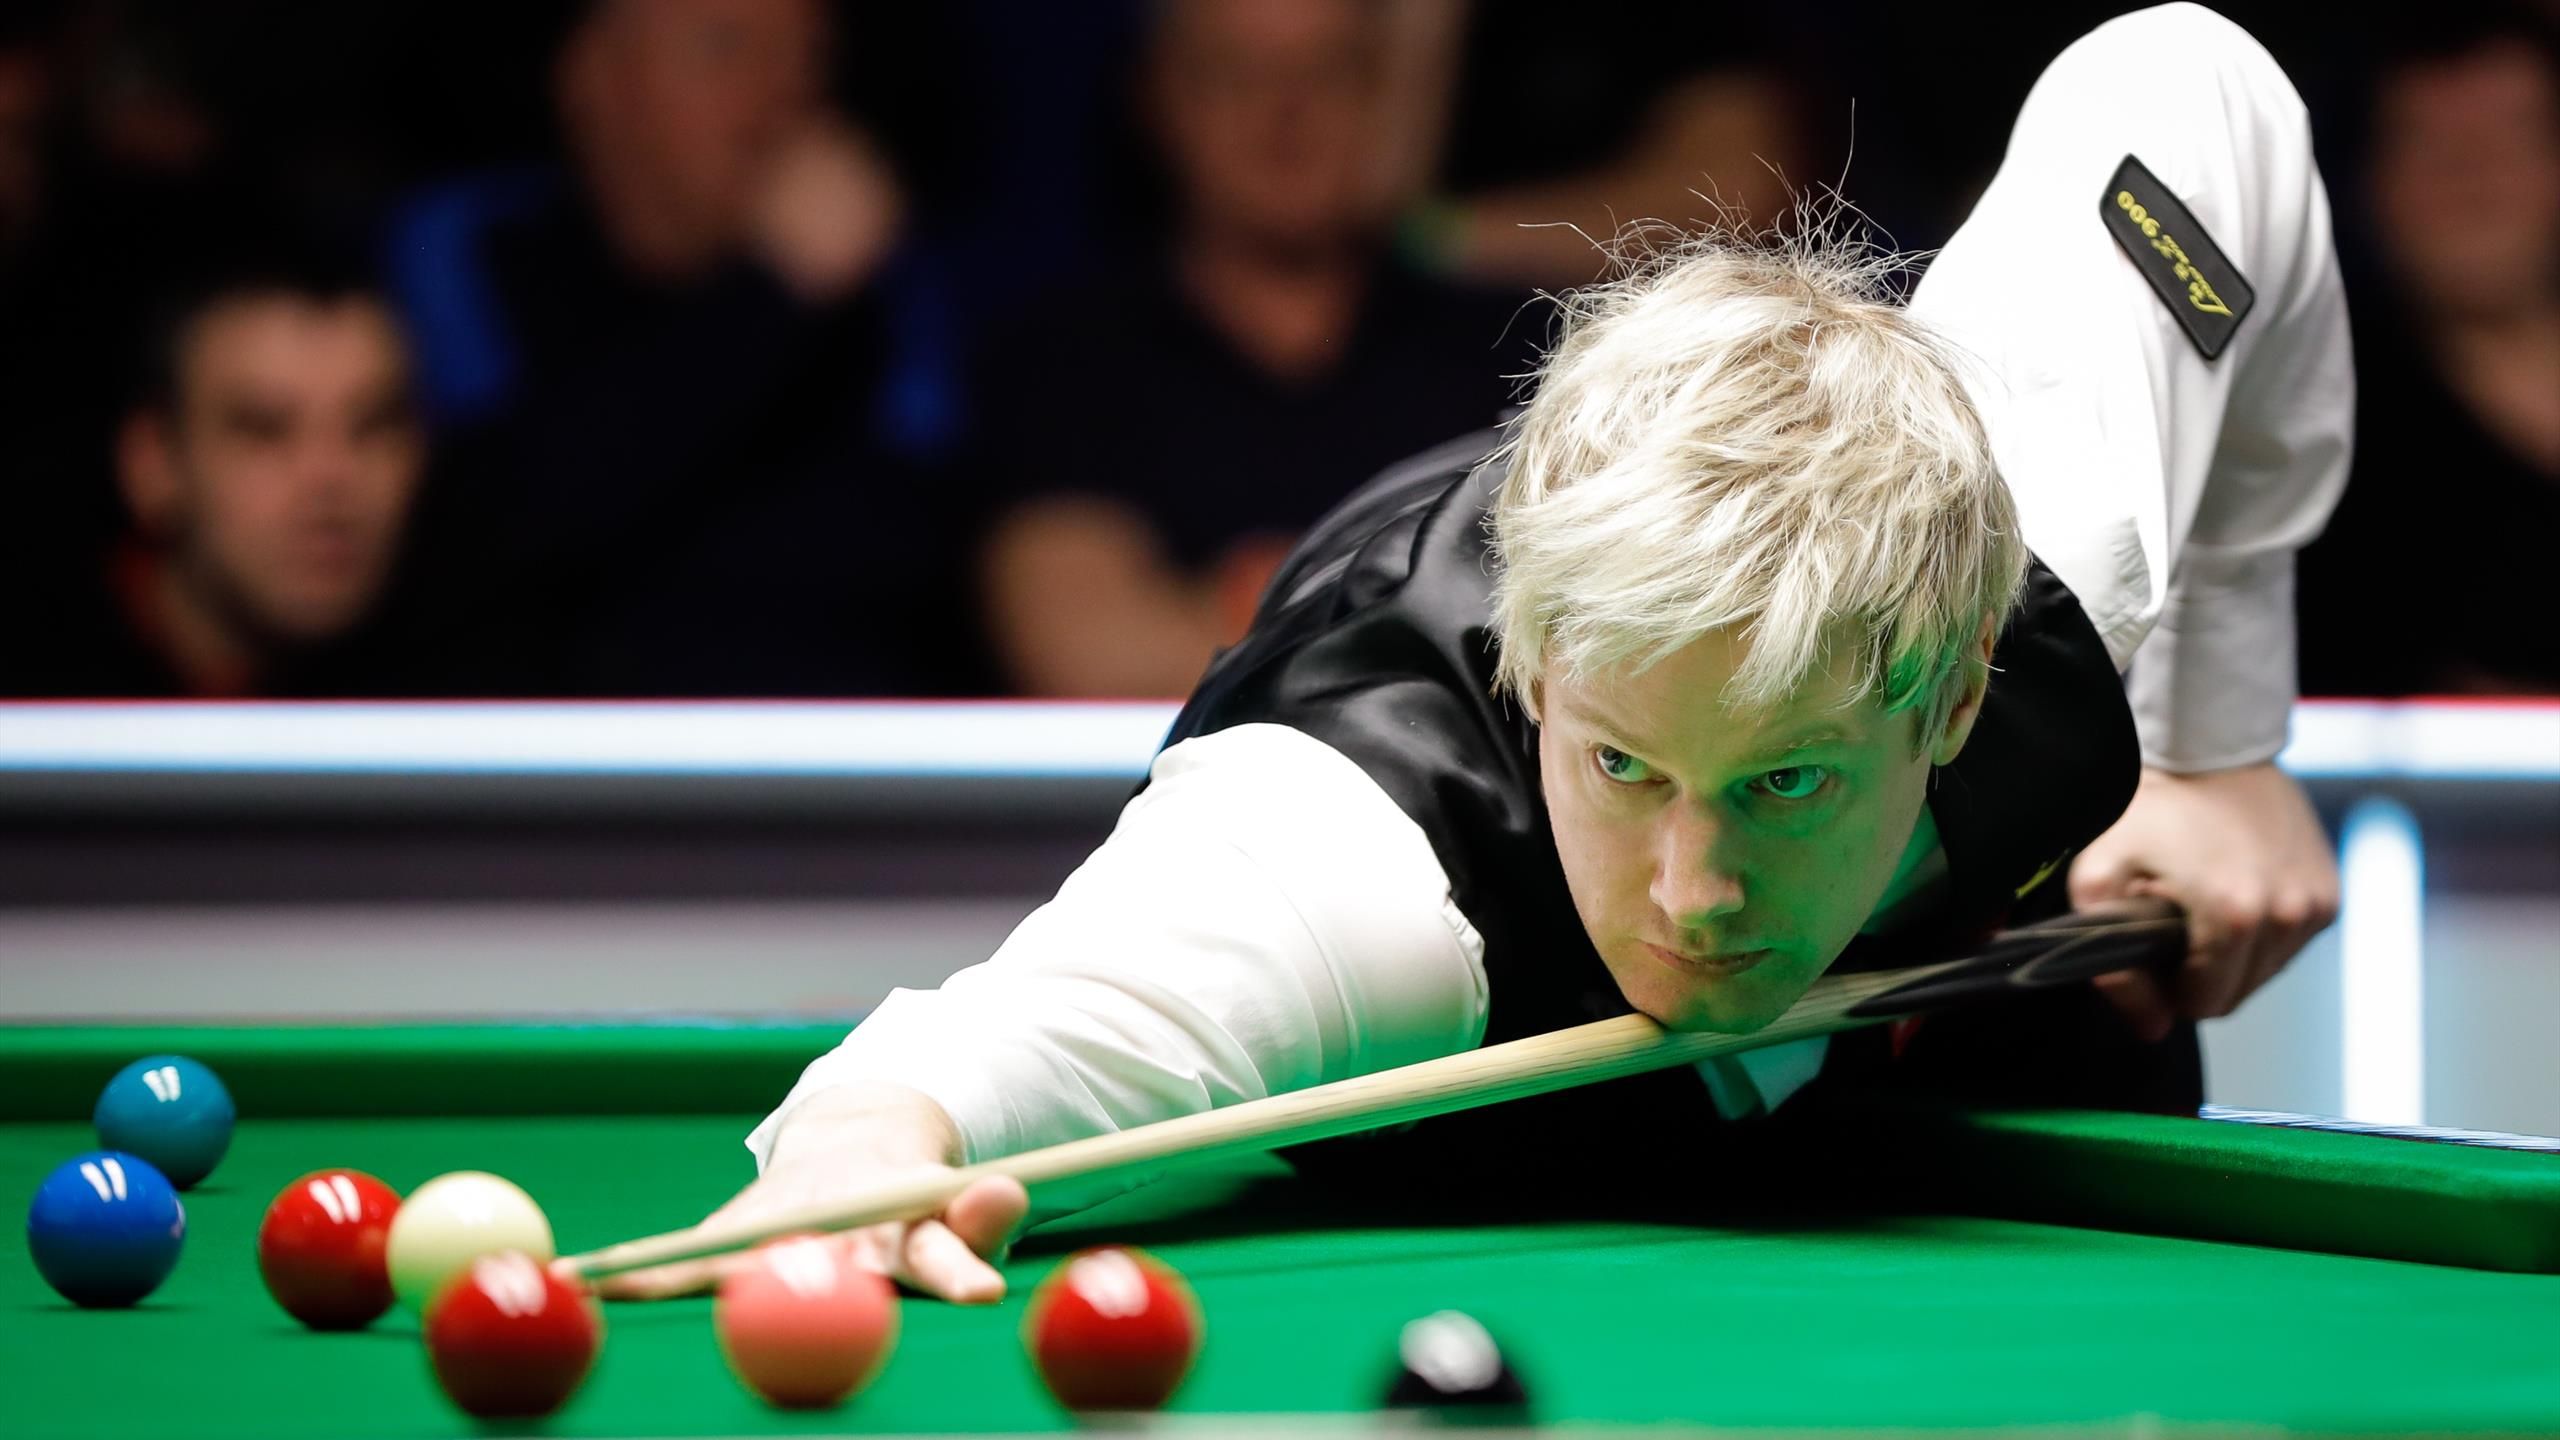 Robertson Overcomes Early Slump to Qualify for World Snooker Championship